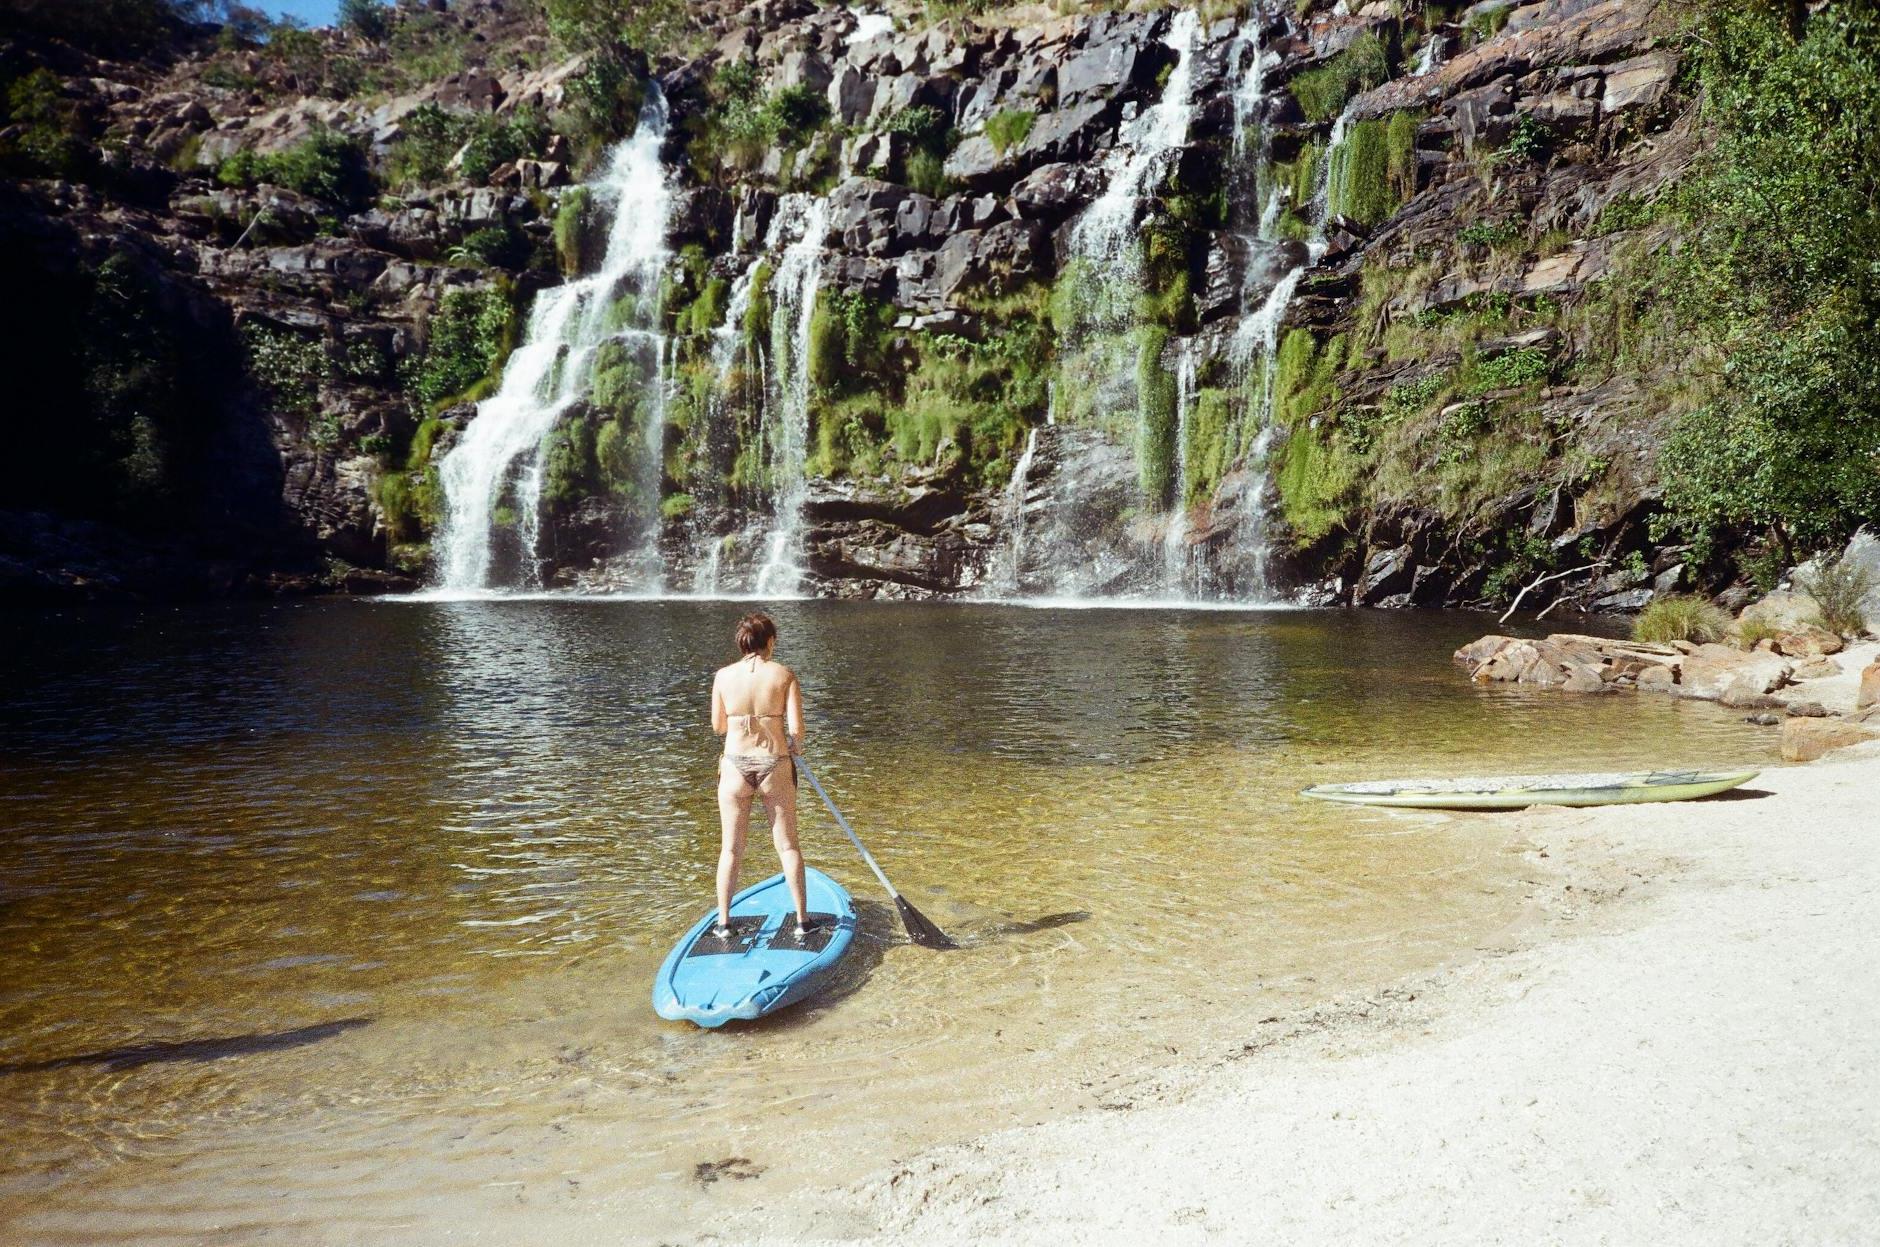 A man standing on a paddle board in front of a waterfall